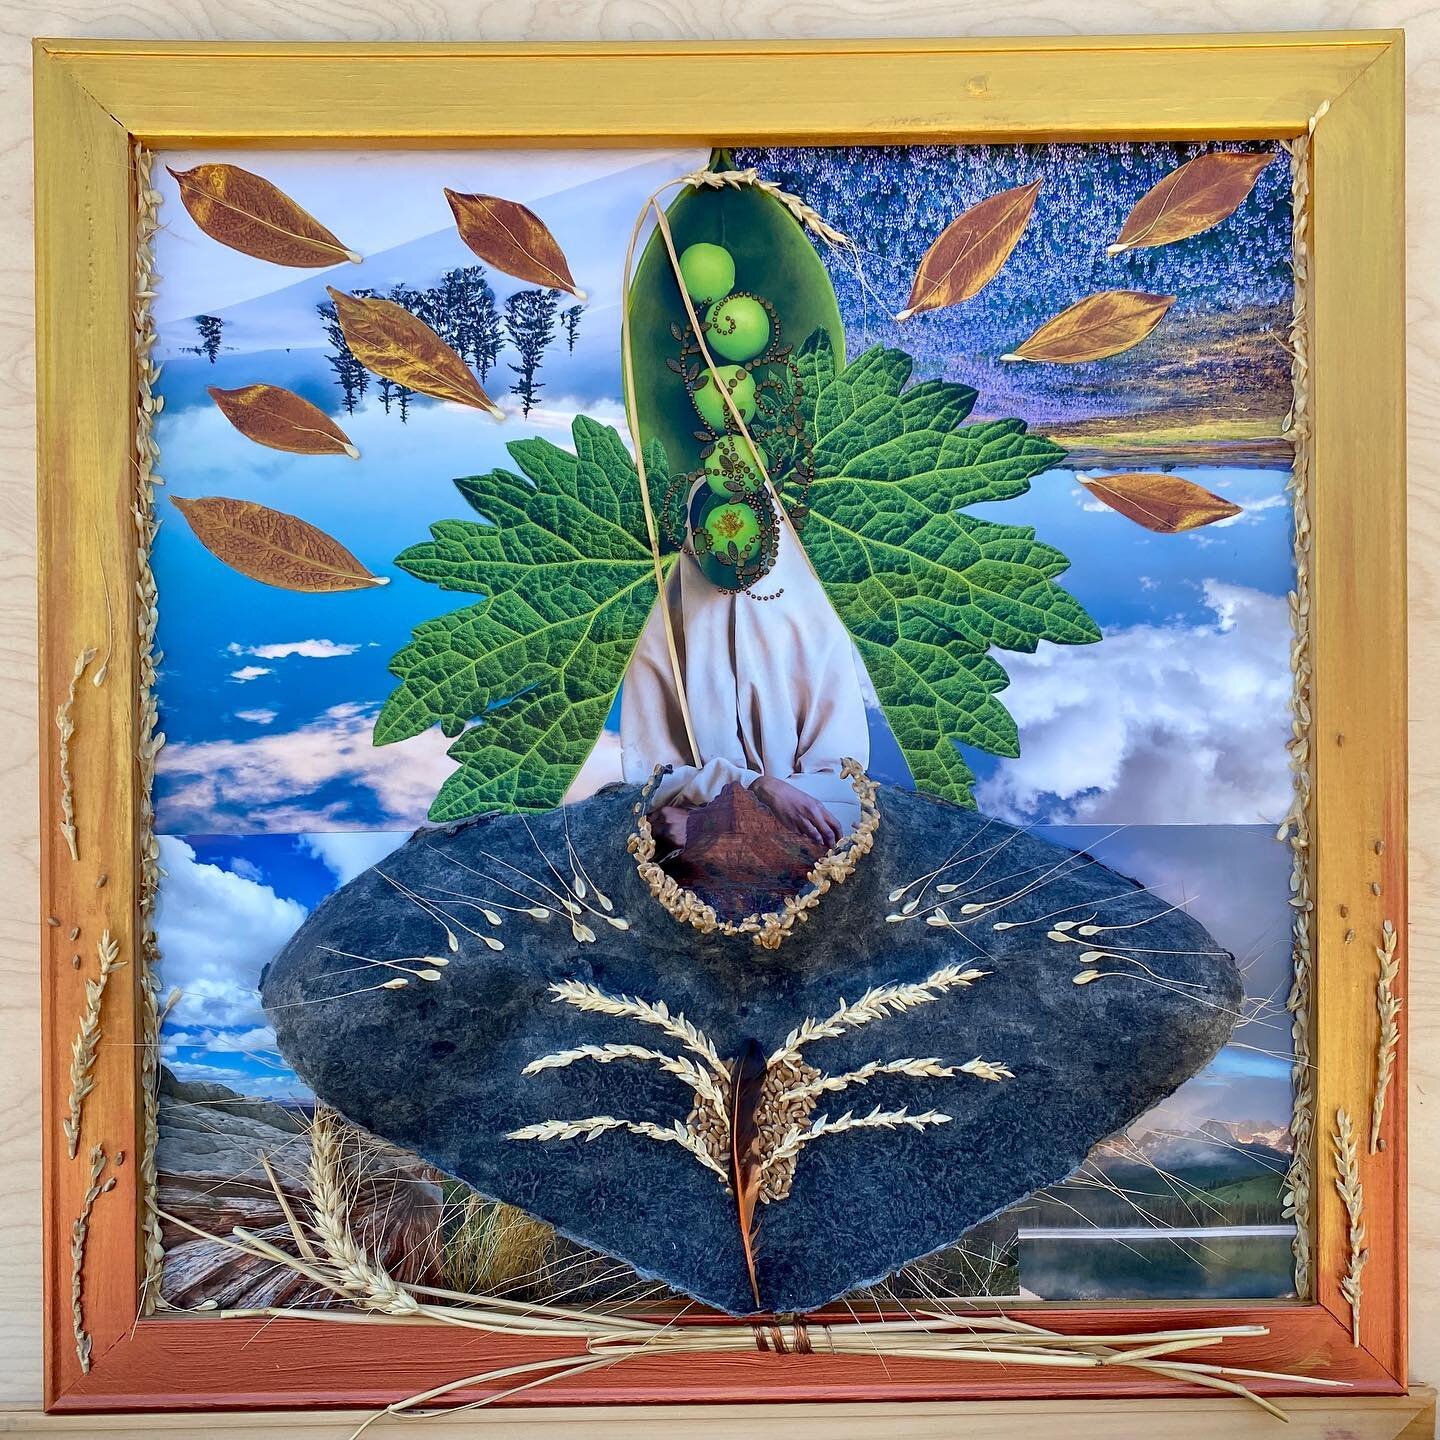 regina terrae viventis, Queen of the Living Earth - Completed the third in my queens series! #mixedmedia #collage #ecoart #repurpose #barley #makeart